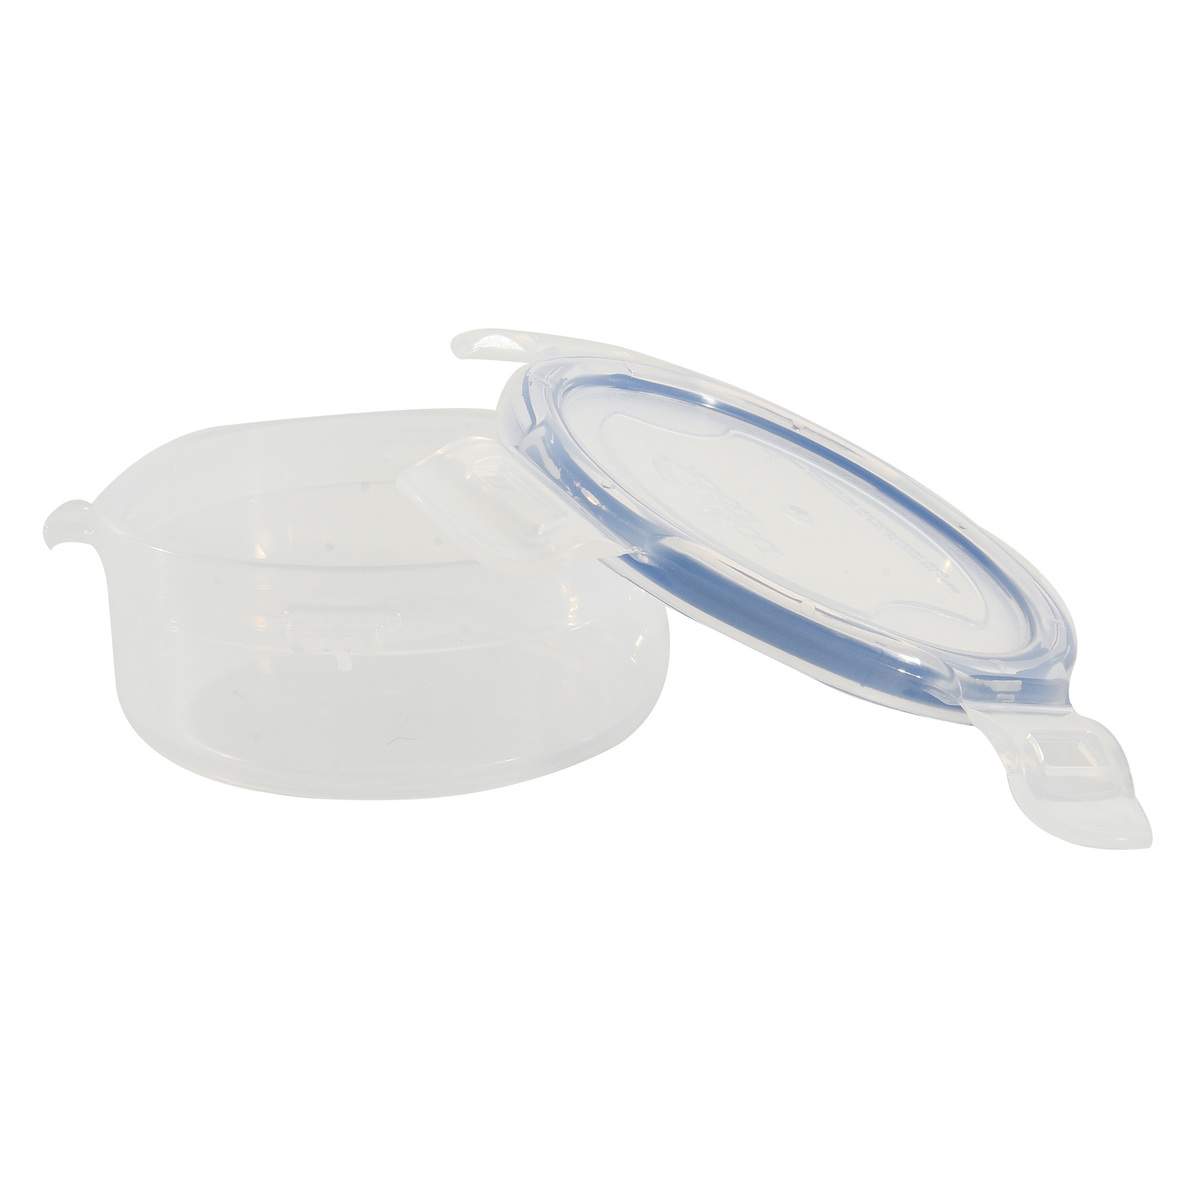 Lock & Lock Round Food Container, 140 ml, Clear, HPL934